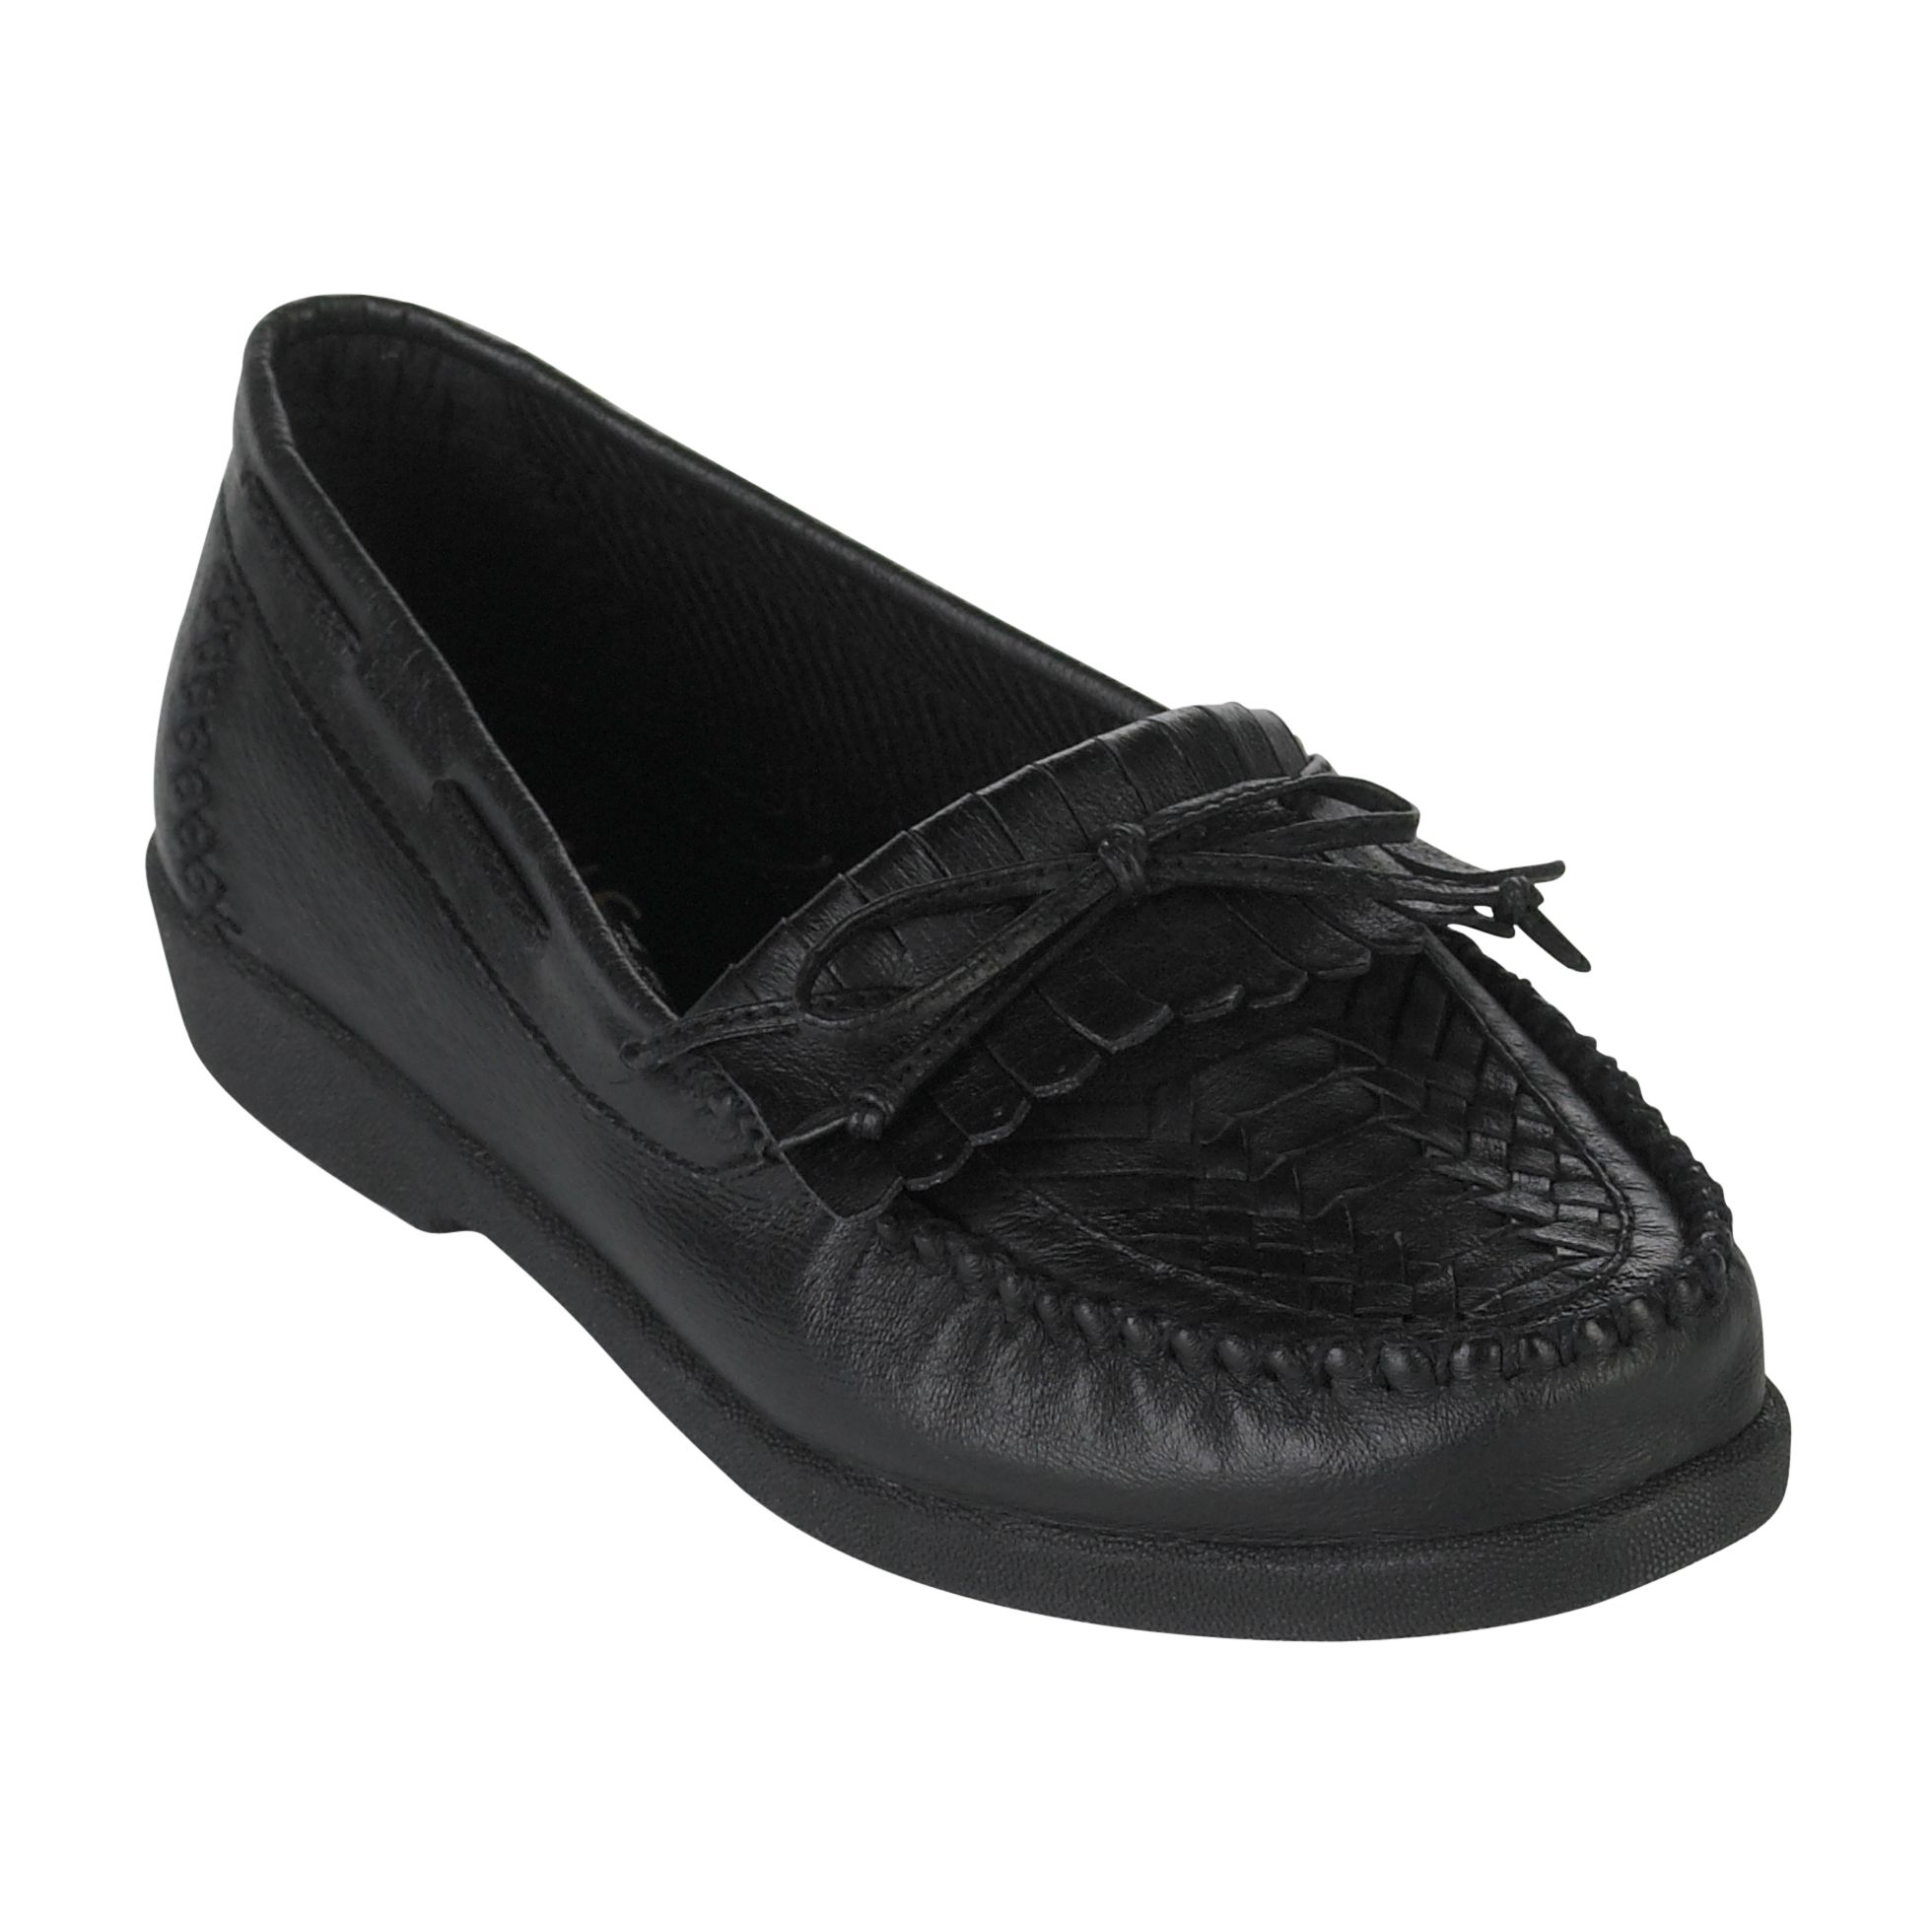 Basic Editions Women's Eloise Leather Wide Width Moccasin  - Black